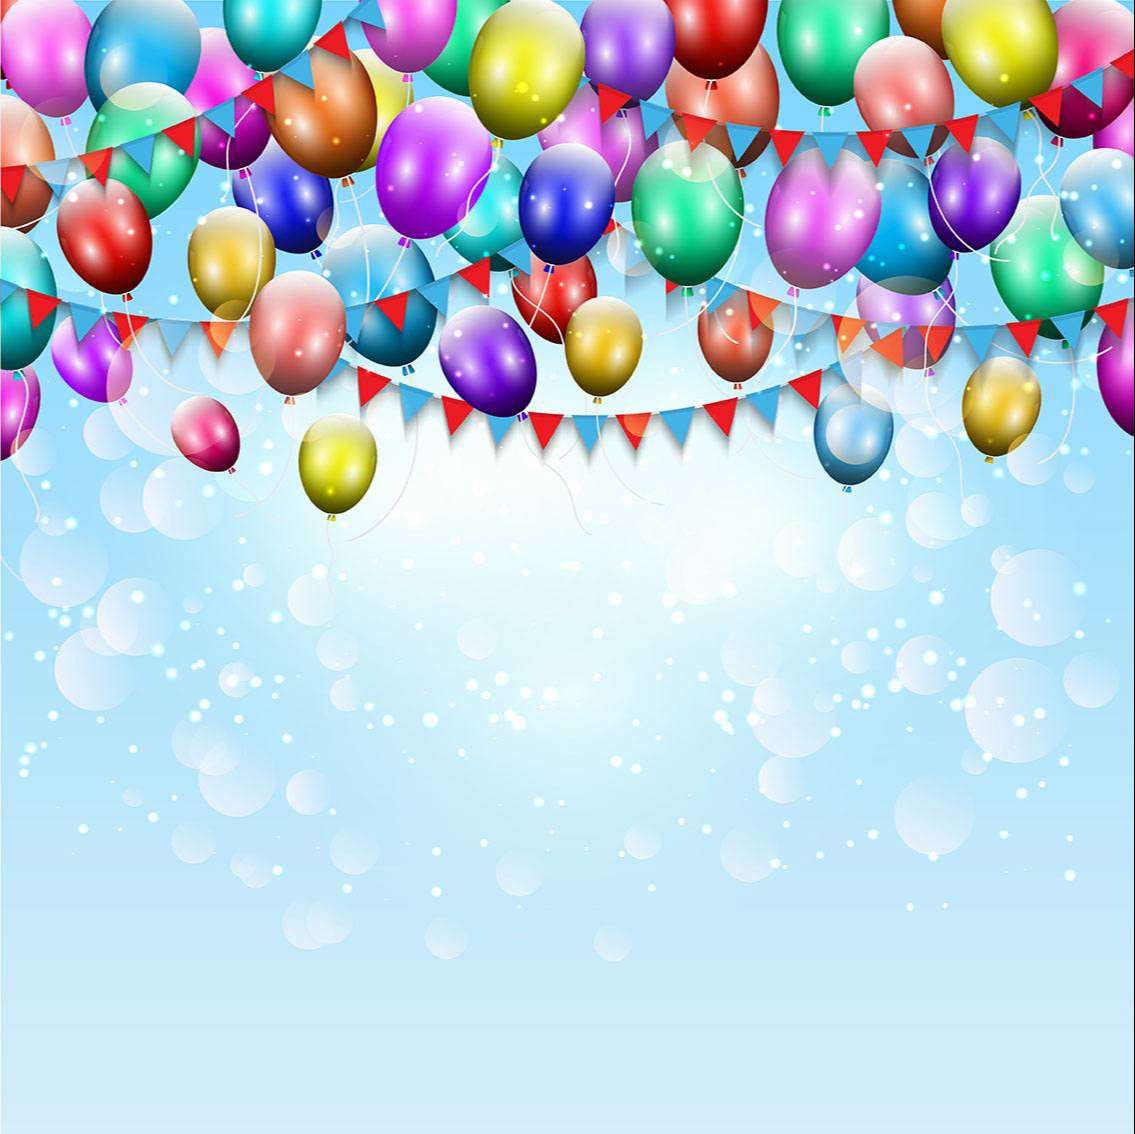 Balloons and bunting background